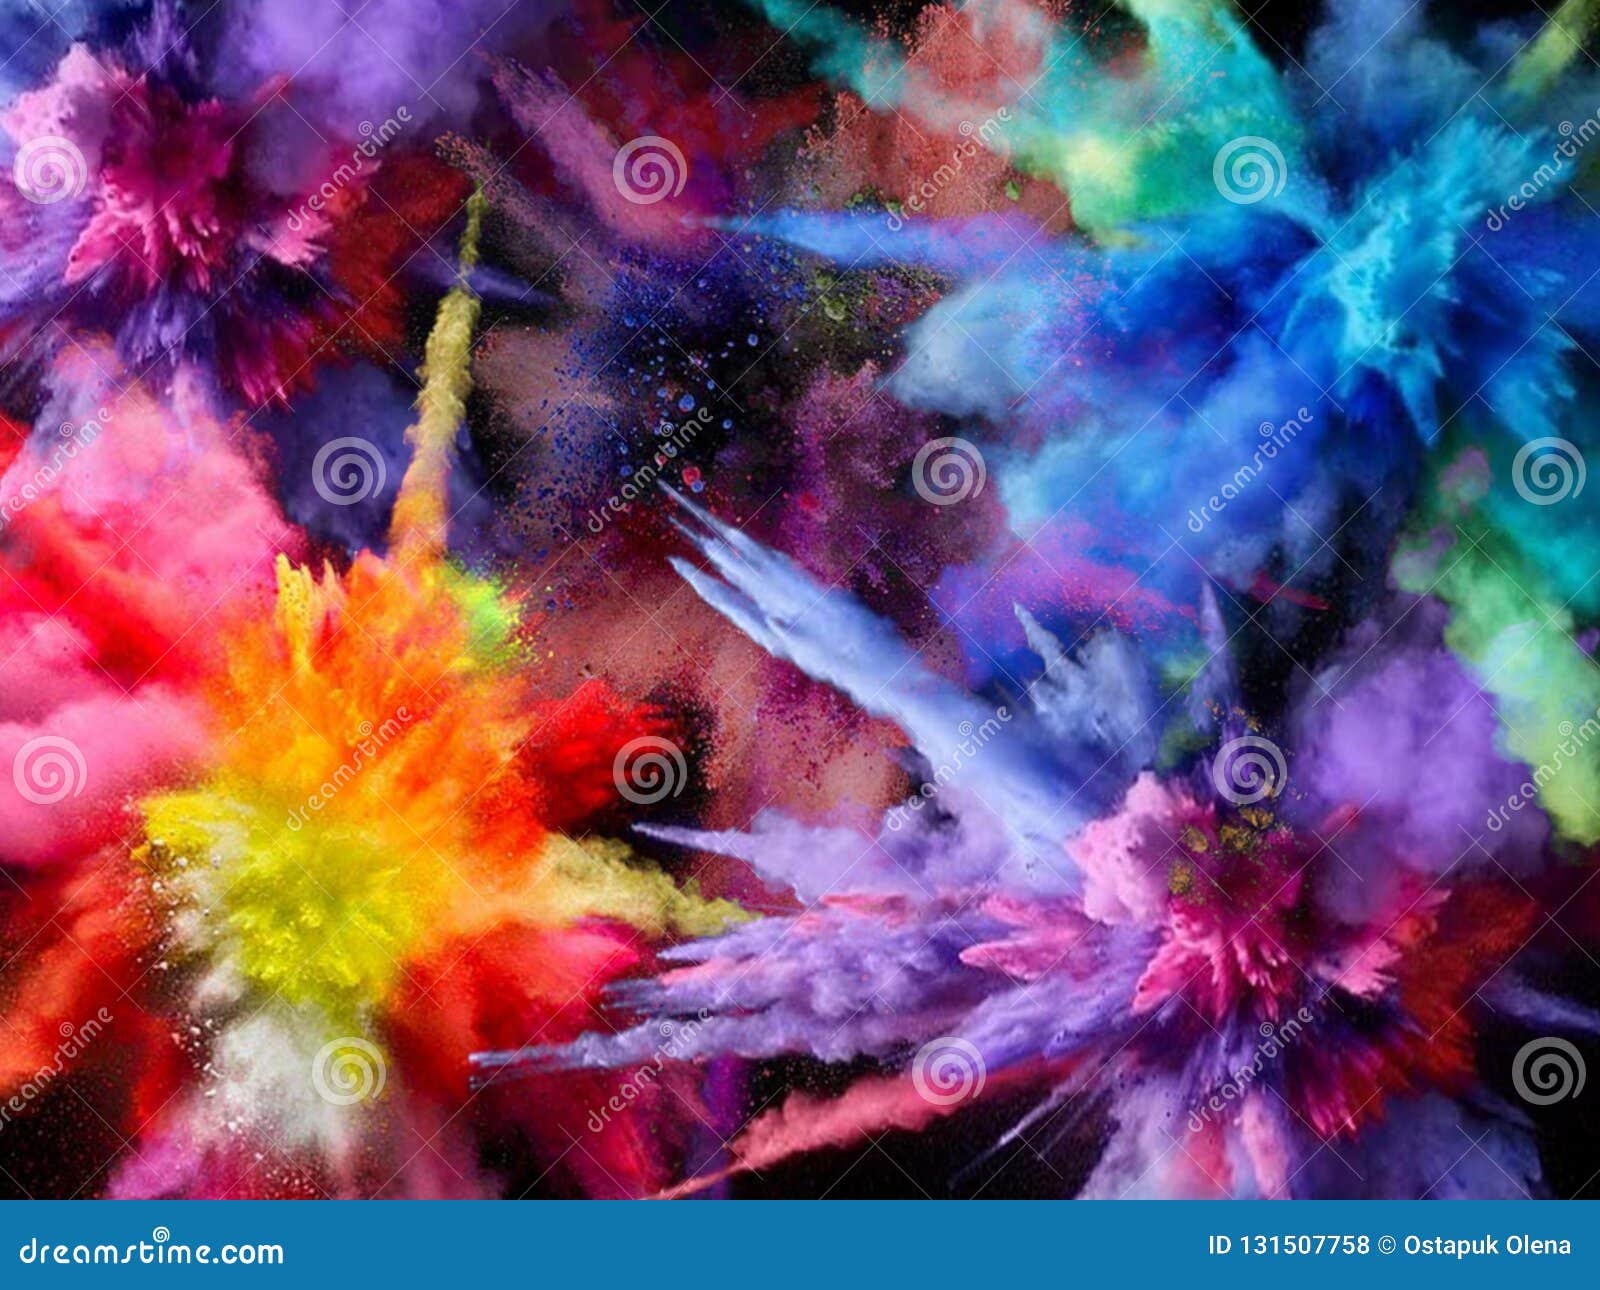 background. paint. bright.explosion with paint